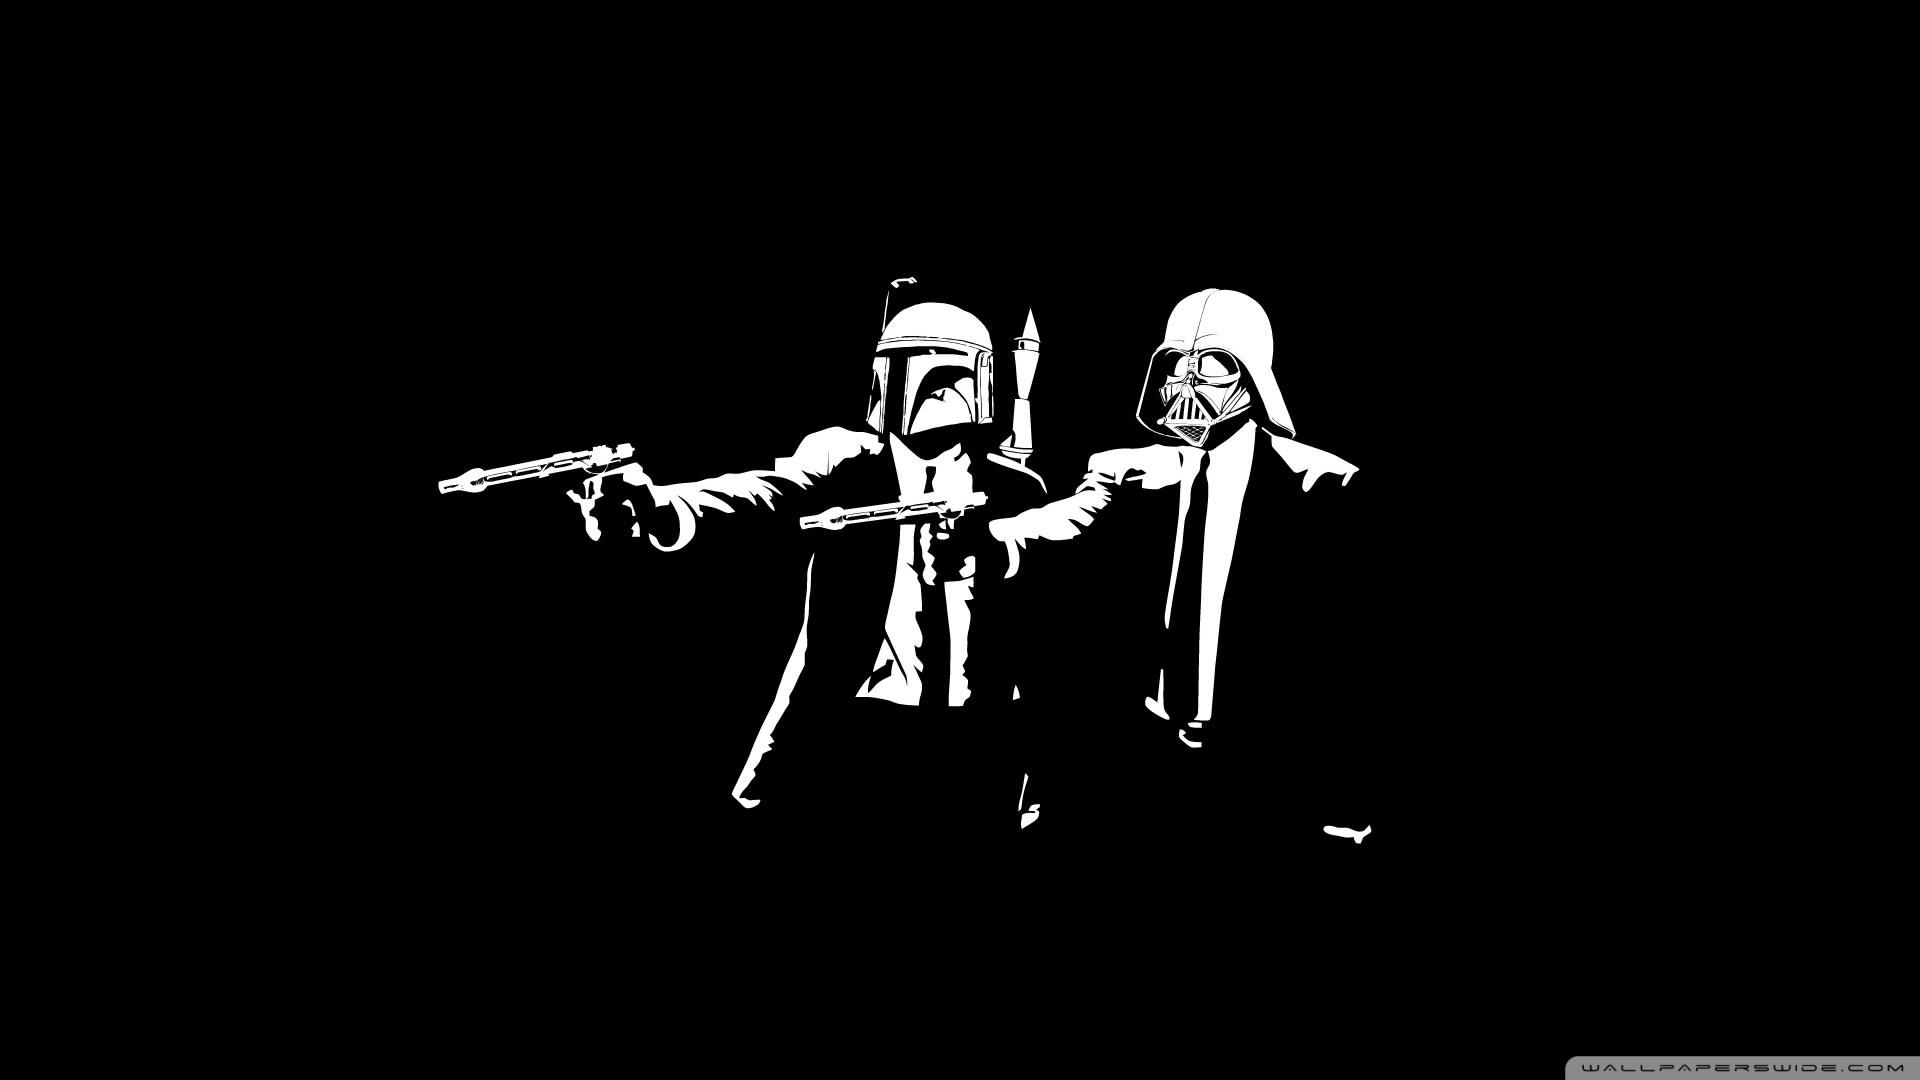 Stunning Star Wars Pulp Fiction Wallpaper image For Free